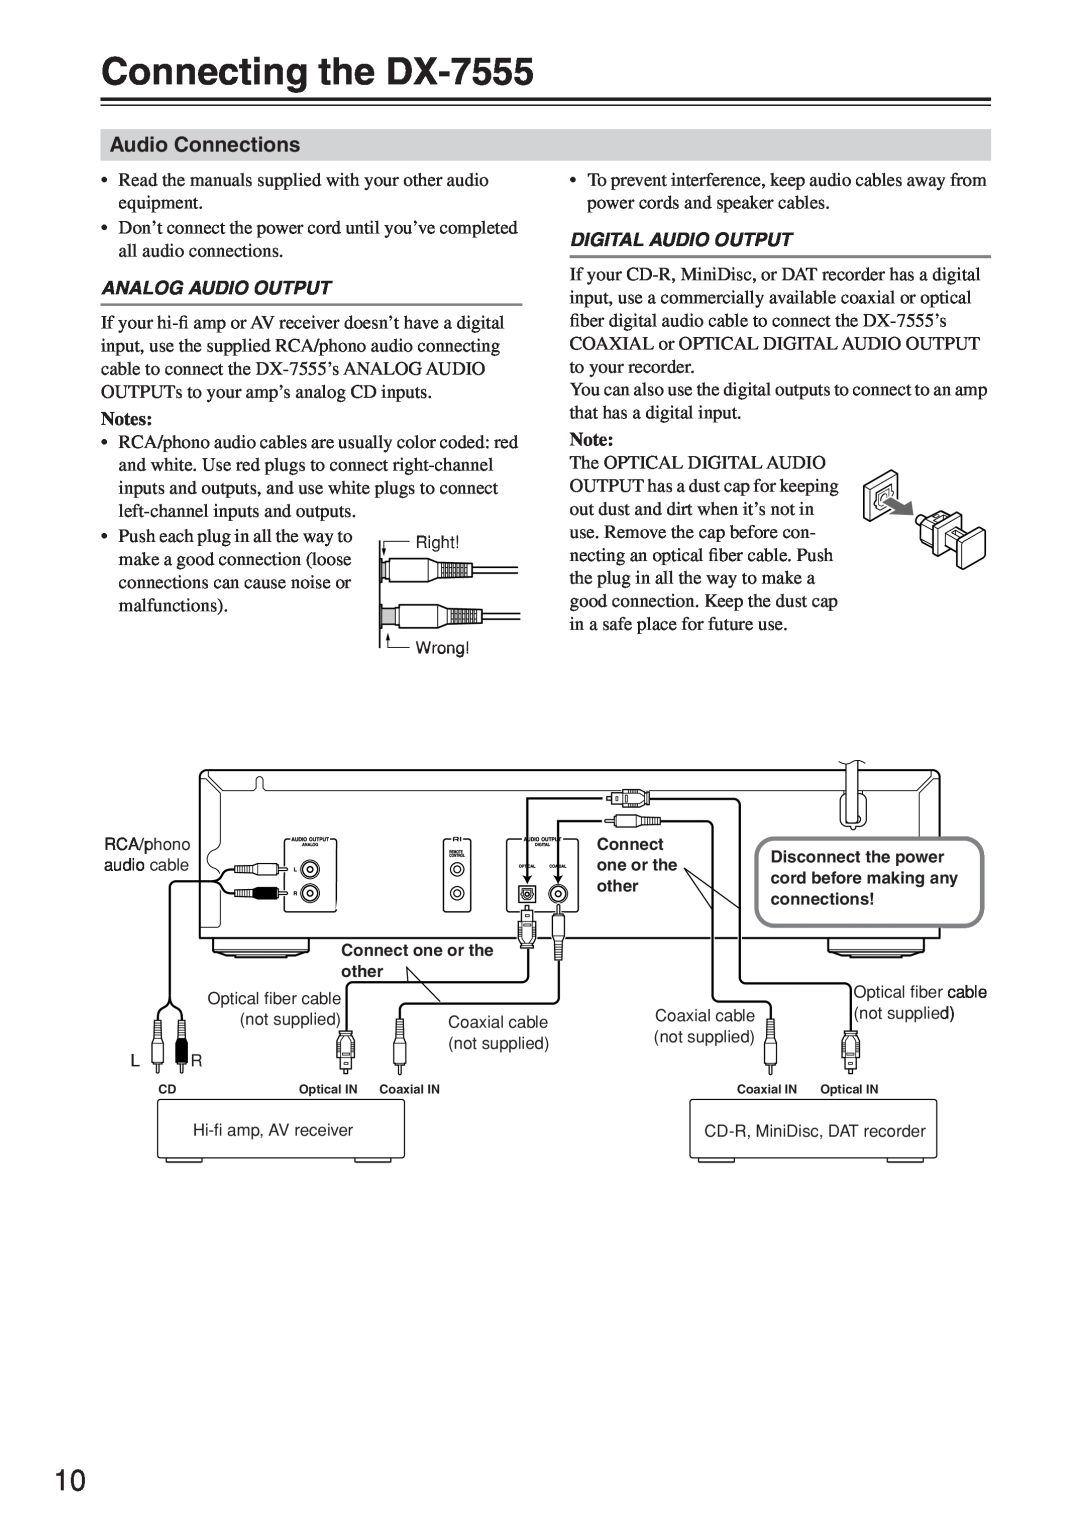 Onkyo instruction manual Connecting the DX-7555, Audio Connections, Analog Audio Output, Digital Audio Output 